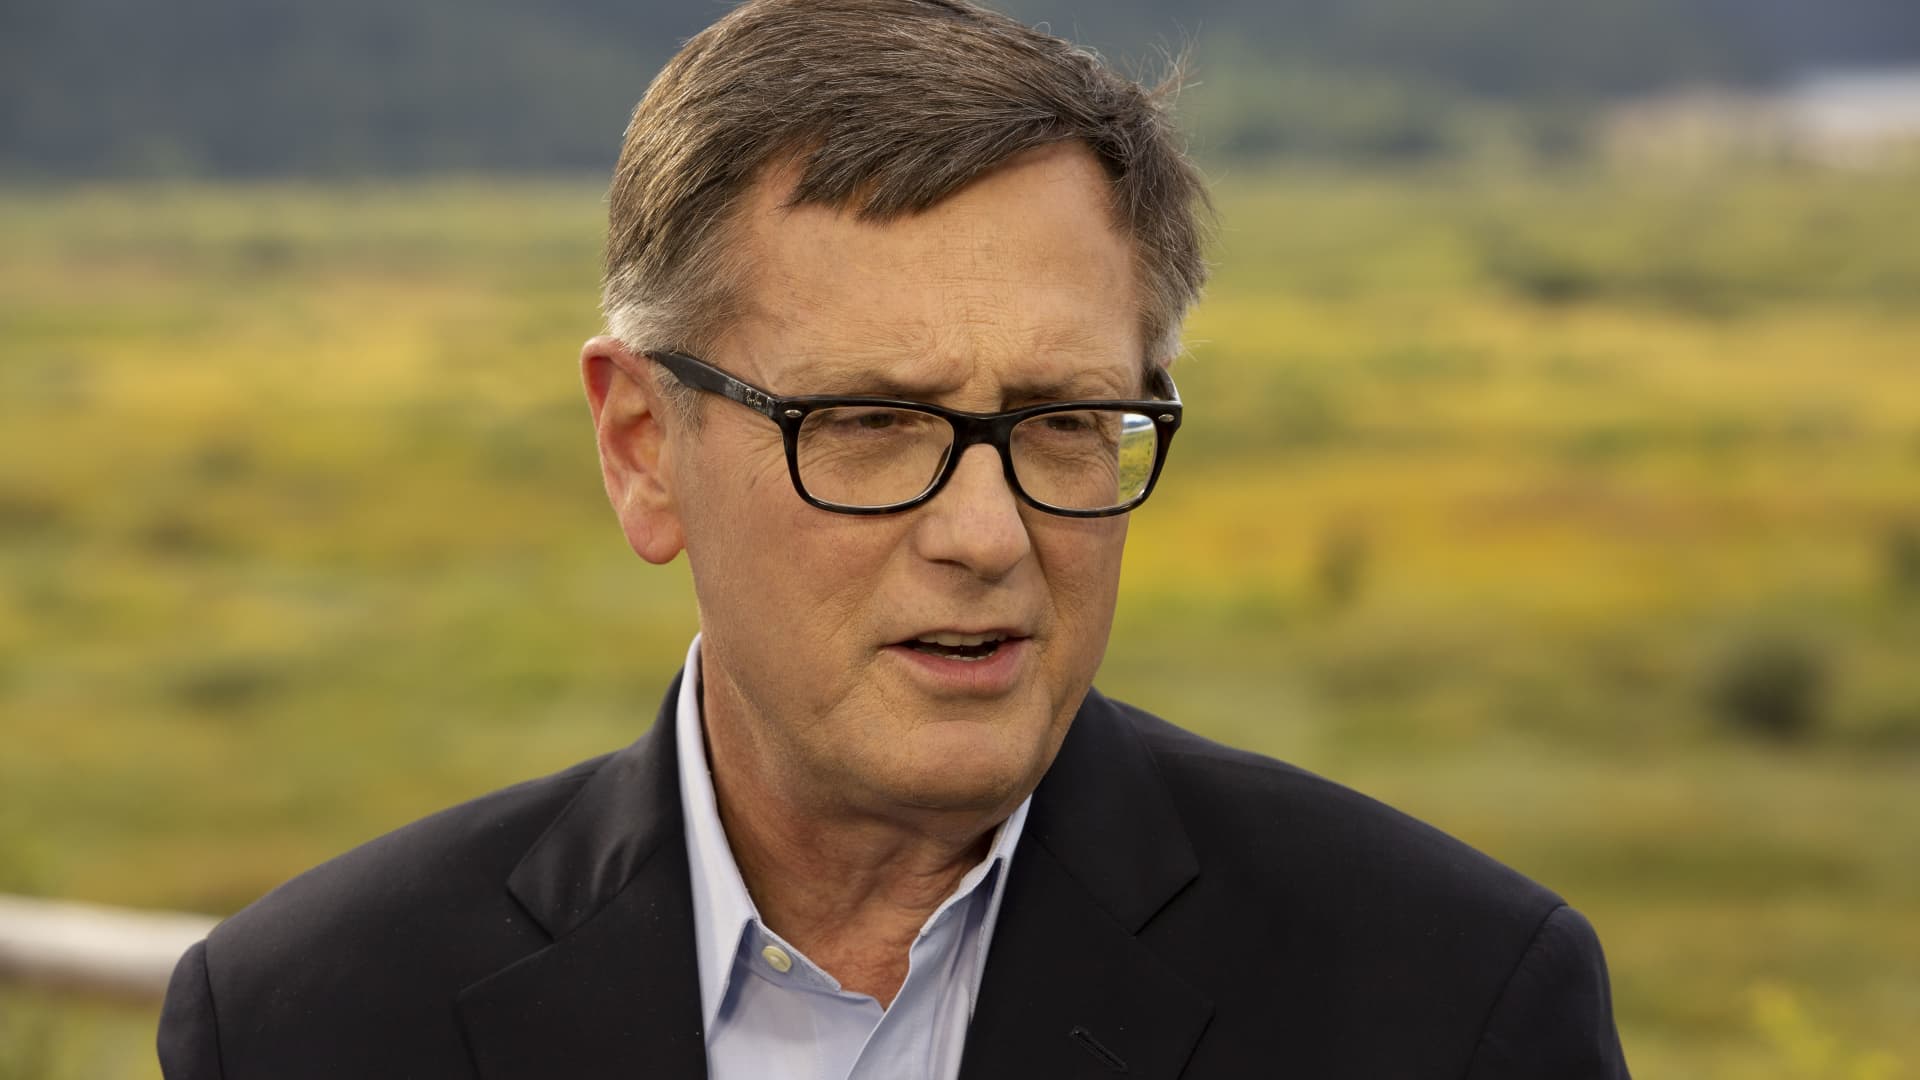 Richard Clarida, Vice Chairman of the Federal Reserve, during the annual symposium in Jackson Hole, Wyoming on August 23, 2019.